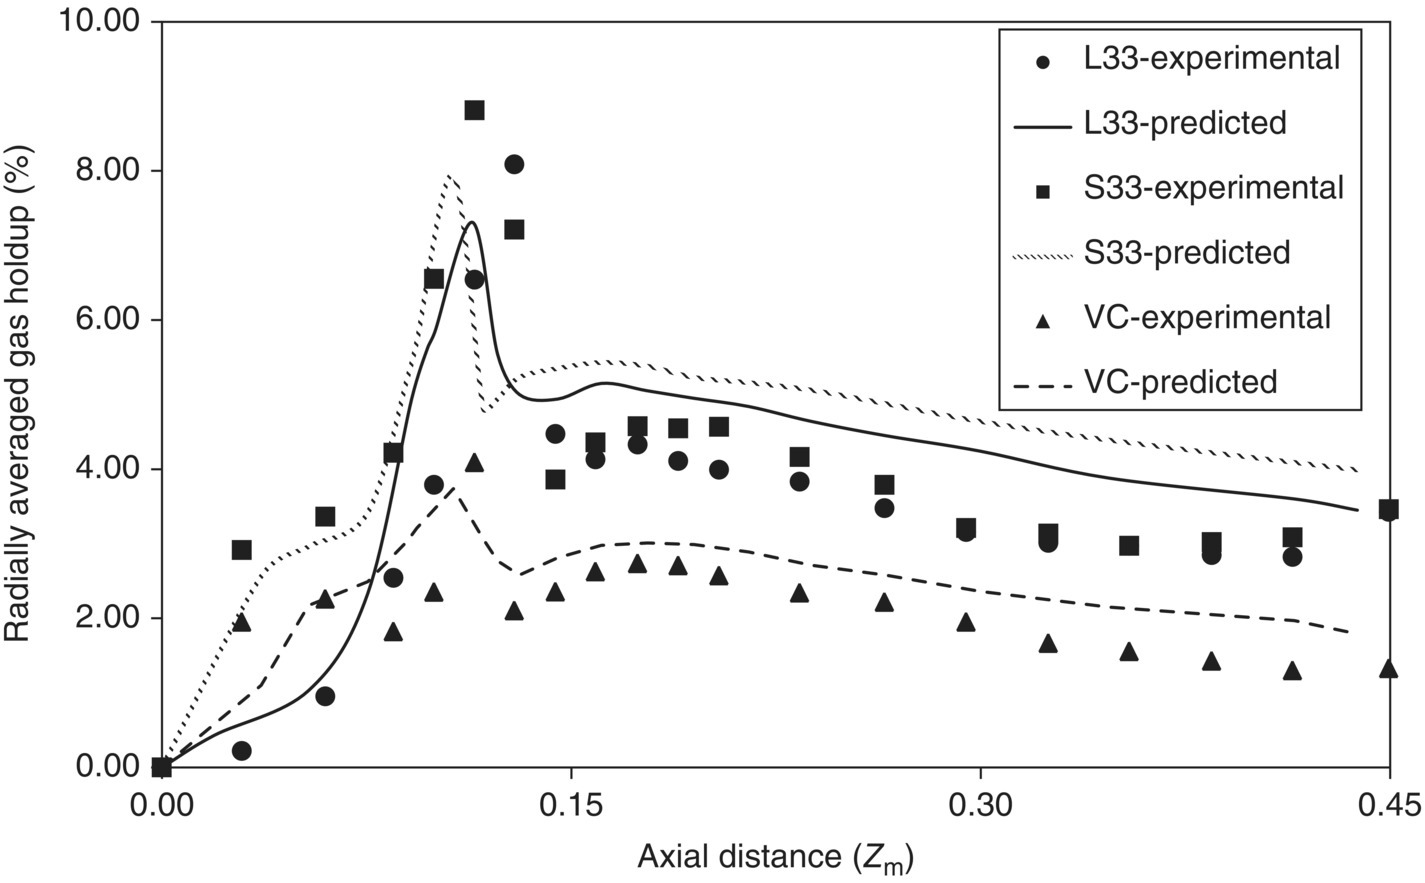 Radially averaged gas holdup vs. axial distance displaying 3 curves for L33-experimental, S33-experimental, and VC-experimental and 3 markers for L33-predicted, S33-predicted, and VC-predicted.